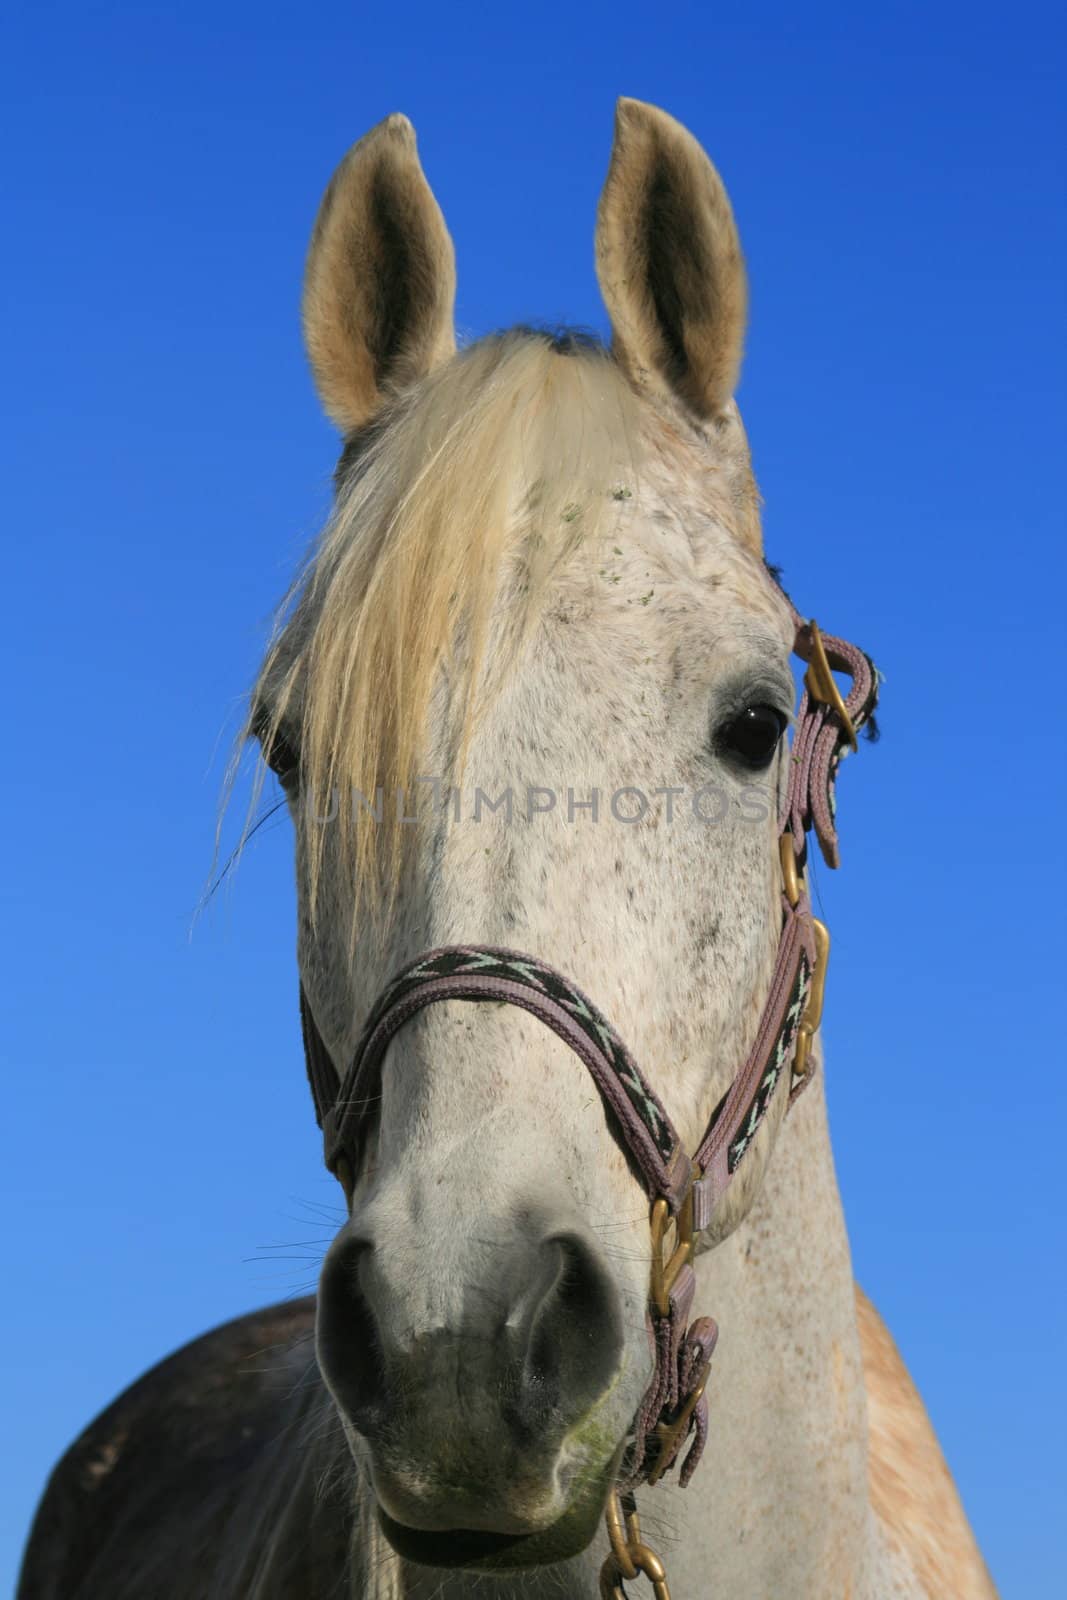 Headshot of a horse over clear blue sky.
